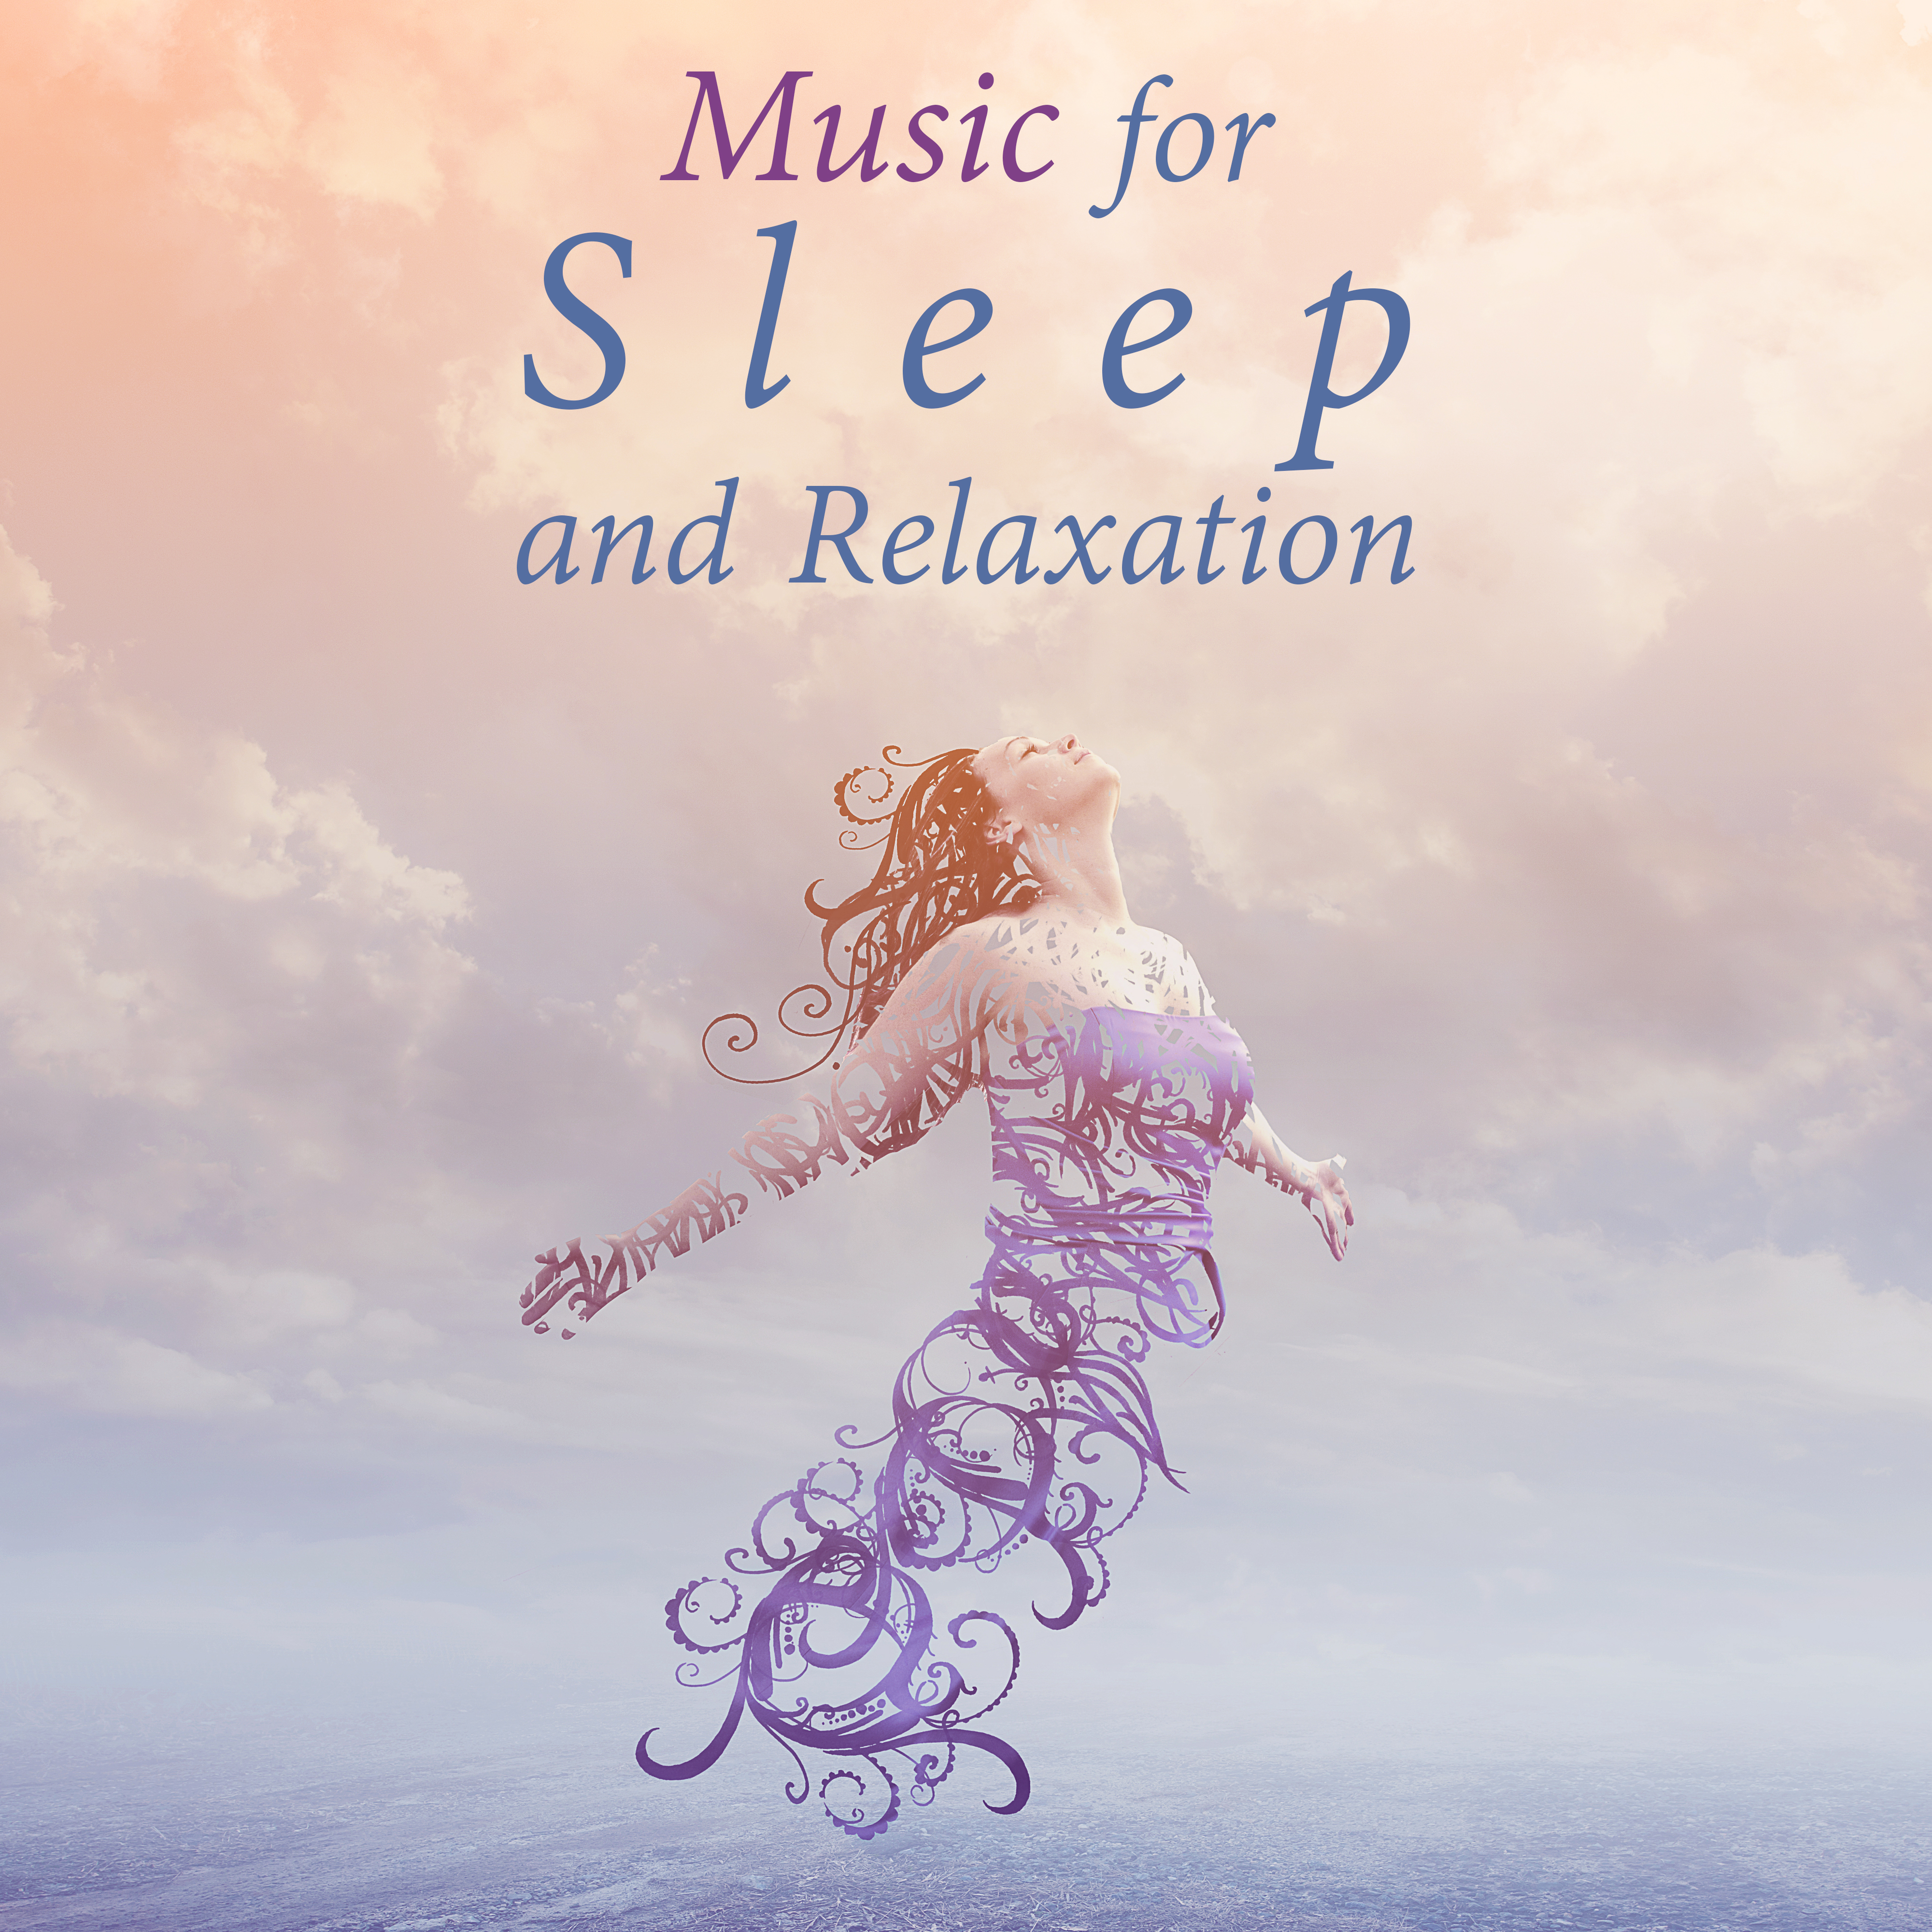 Music for Sleep and Relaxation  Peaceful Nature Sounds, Soothing Rain, Water Music, Sleep, Pure Relaxation Zone